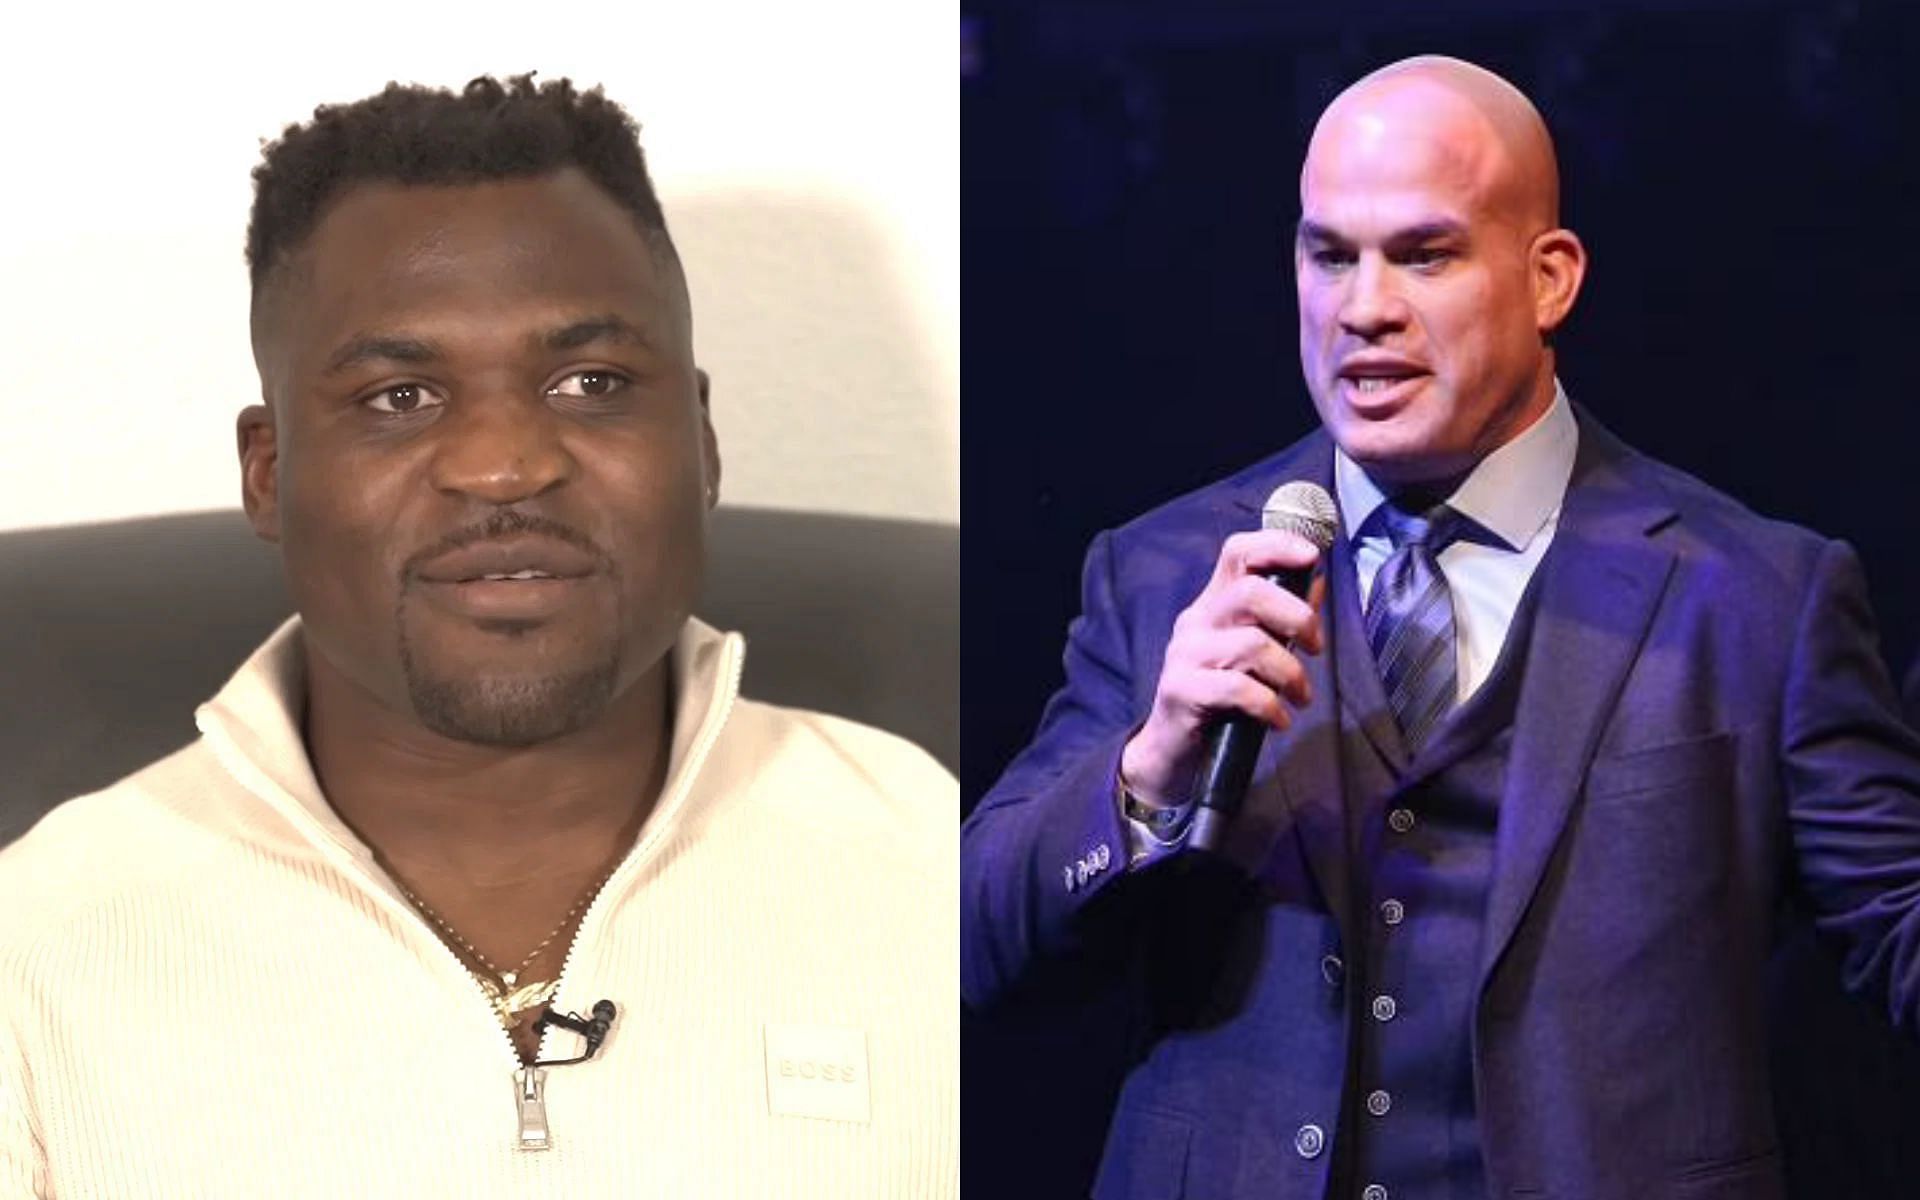 Francis Ngannou (left) and Tito Ortiz (right)